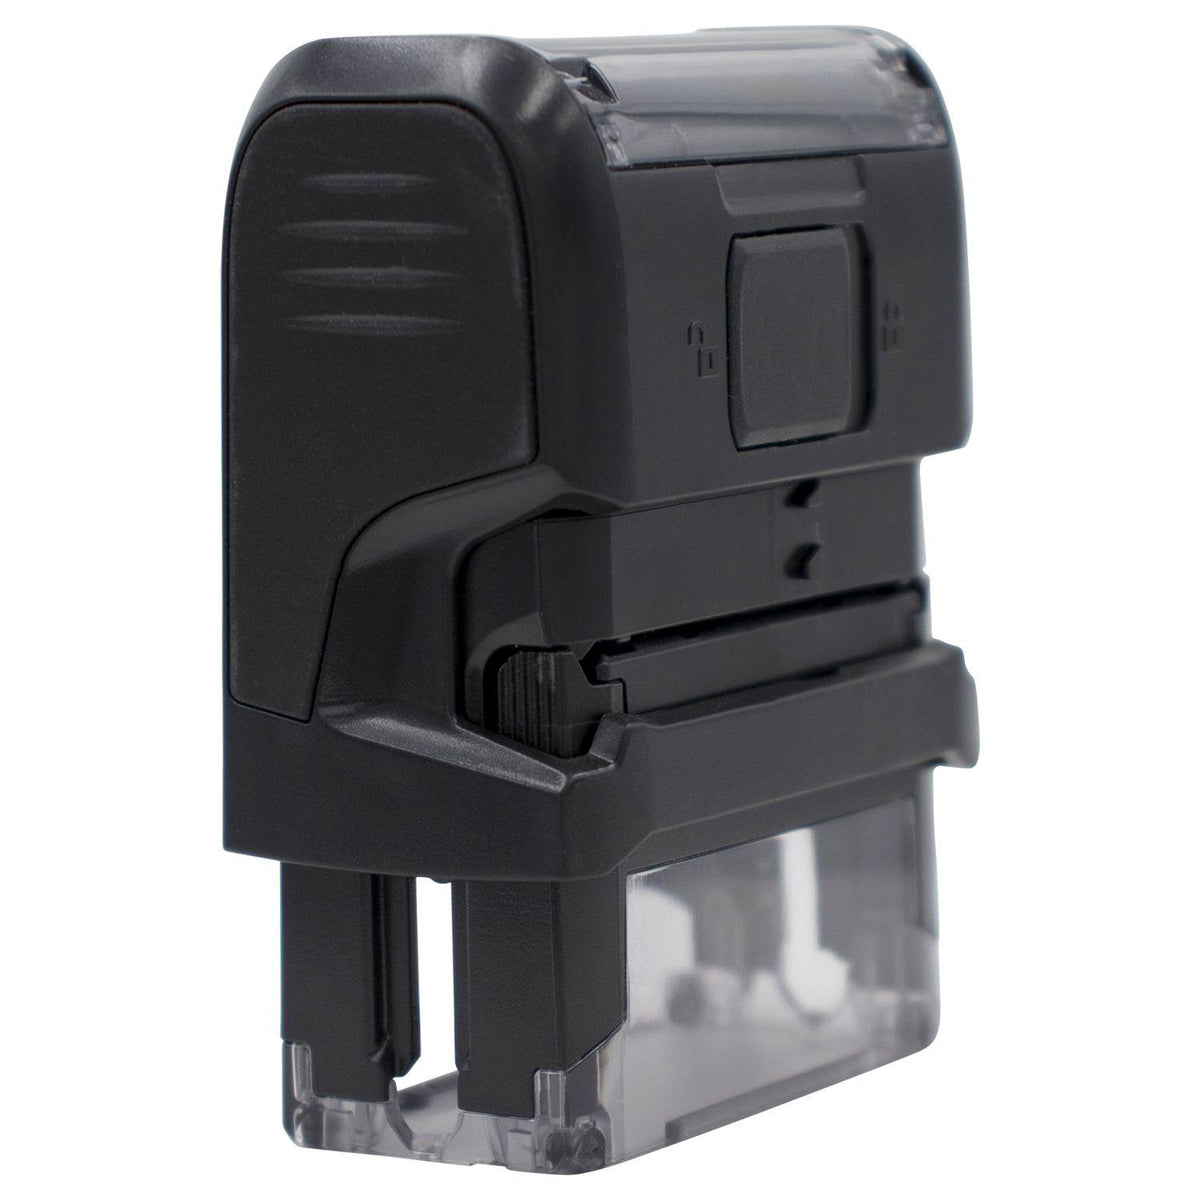 Self Inking Discharge Stamp - Engineer Seal Stamps - Brand_Trodat, Impression Size_Small, Stamp Type_Self-Inking Stamp, Type of Use_Medical Office